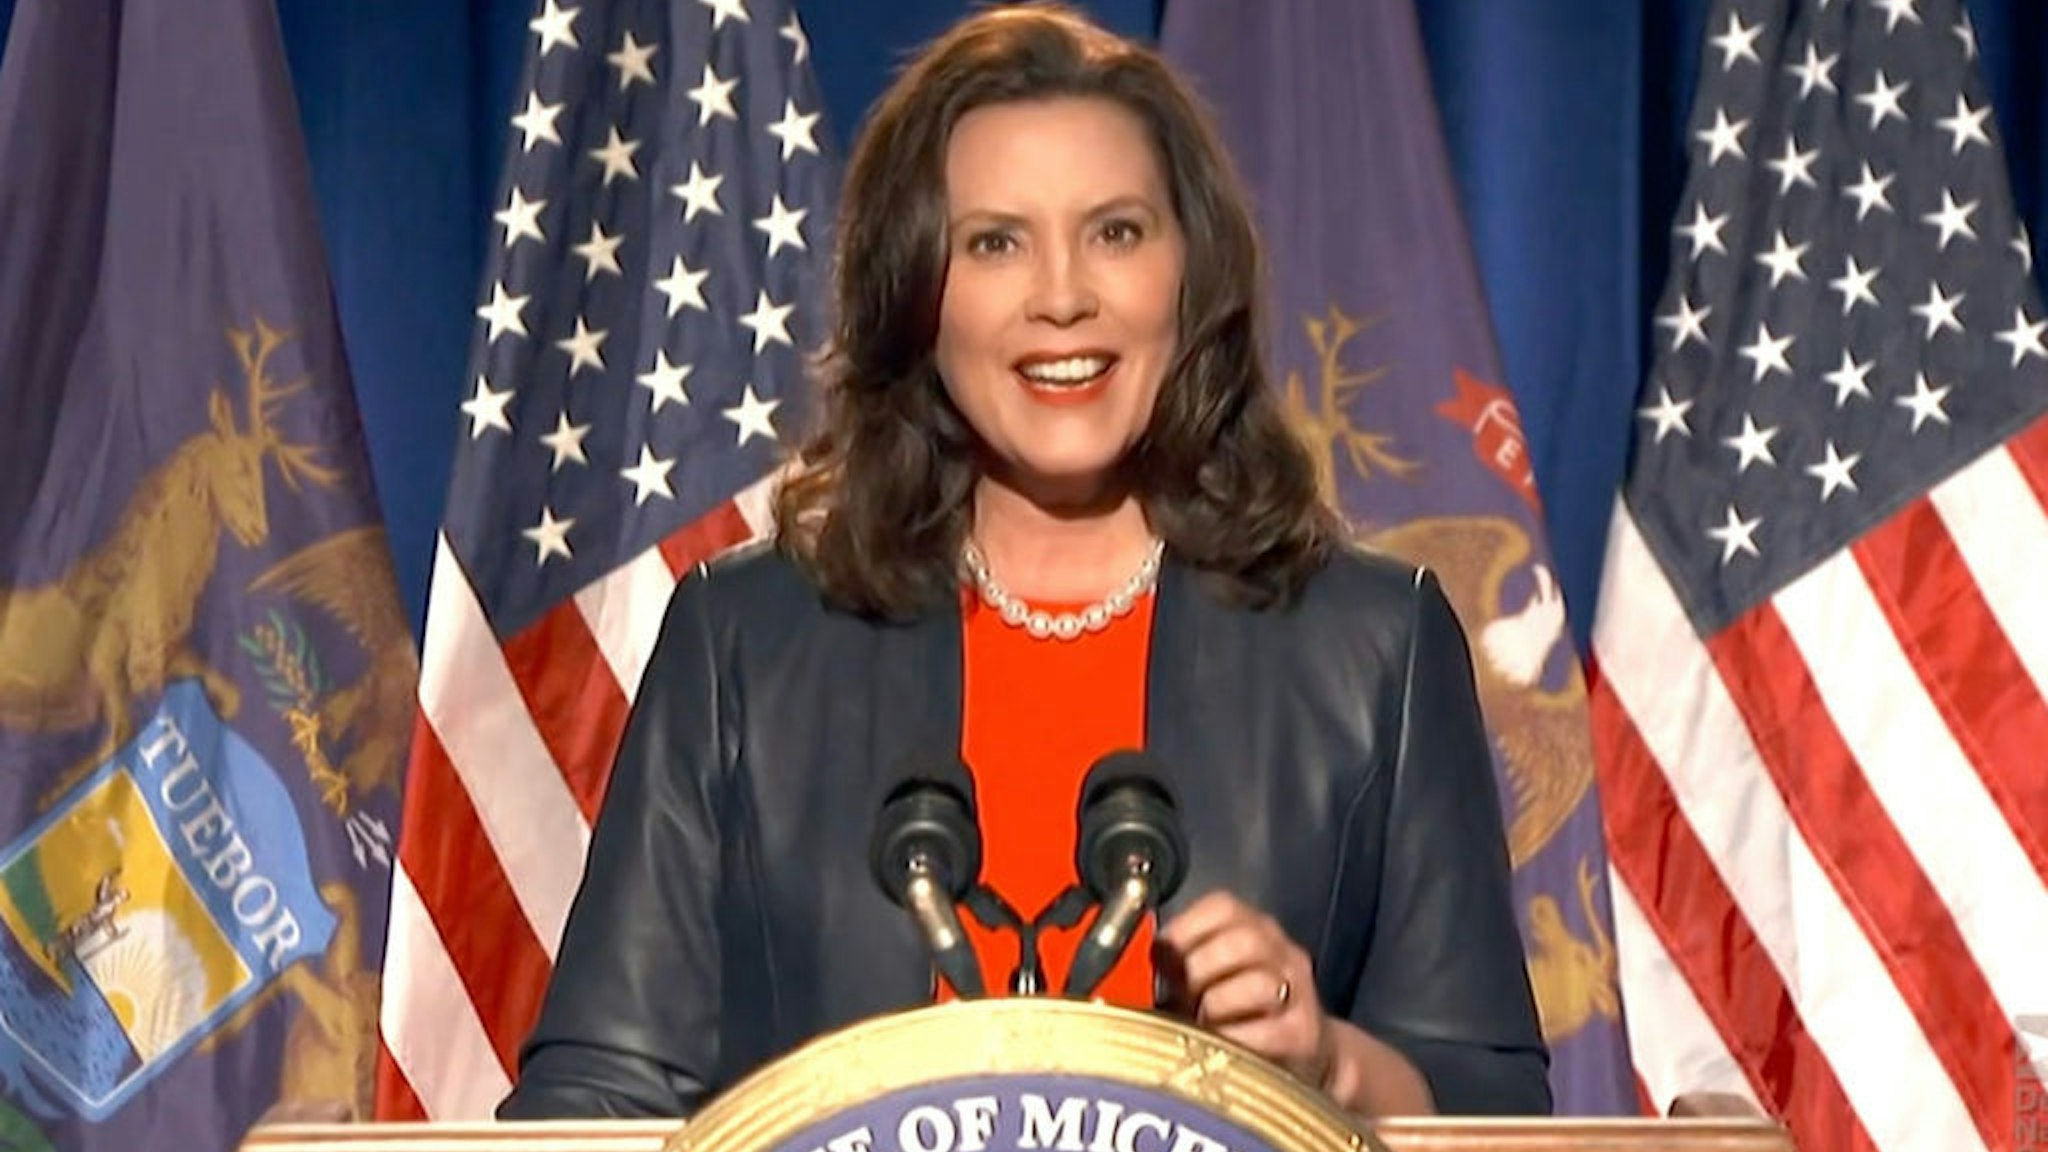 MILWAUKEE, WI - AUGUST 17: In this screenshot from the DNCC’s livestream of the 2020 Democratic National Convention, Michigan Gov. Gretchen Whitmer addresses the virtual convention on August 17, 2020. The convention, which was once expected to draw 50,000 people to Milwaukee, Wisconsin, is now taking place virtually due to the coronavirus pandemic. (Photo by Handout/DNCC via Getty Images)